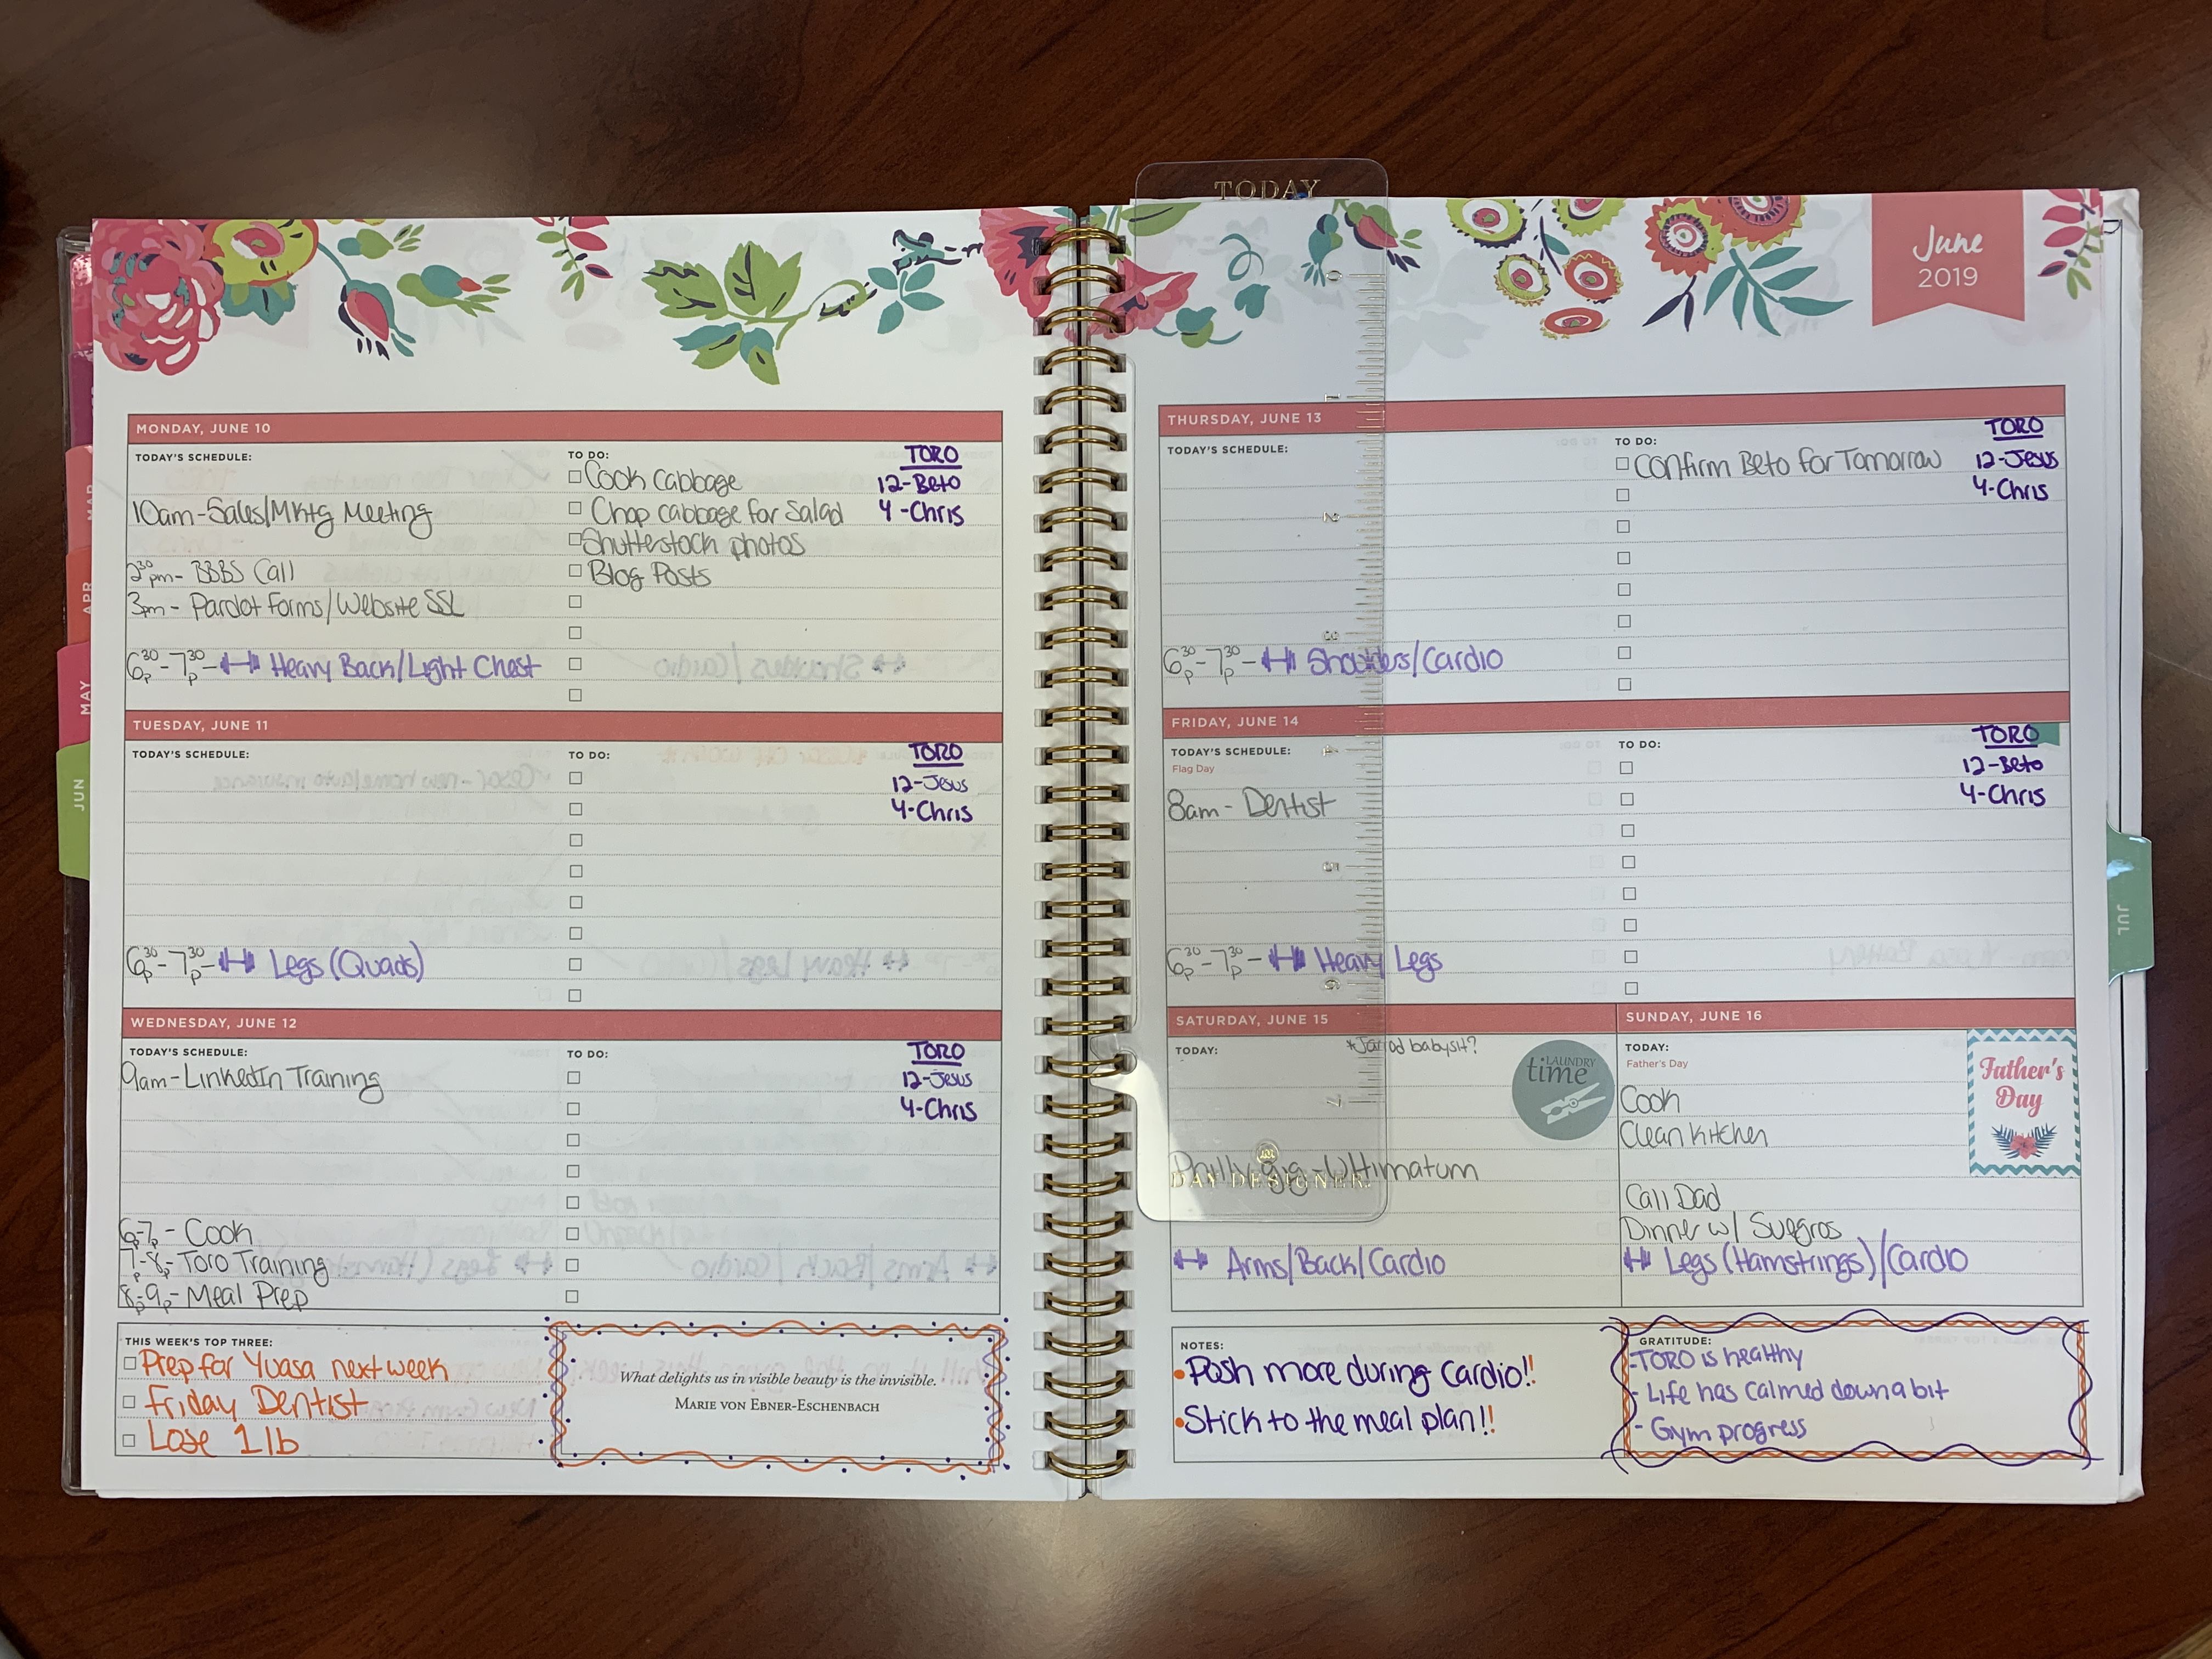 Photo of AnotherGirlNamedAshley's Planner, full-page spread. It is a Day Designer Planner (weekly). The photo shows how AnotherGirlNamedAshley uses her planner.